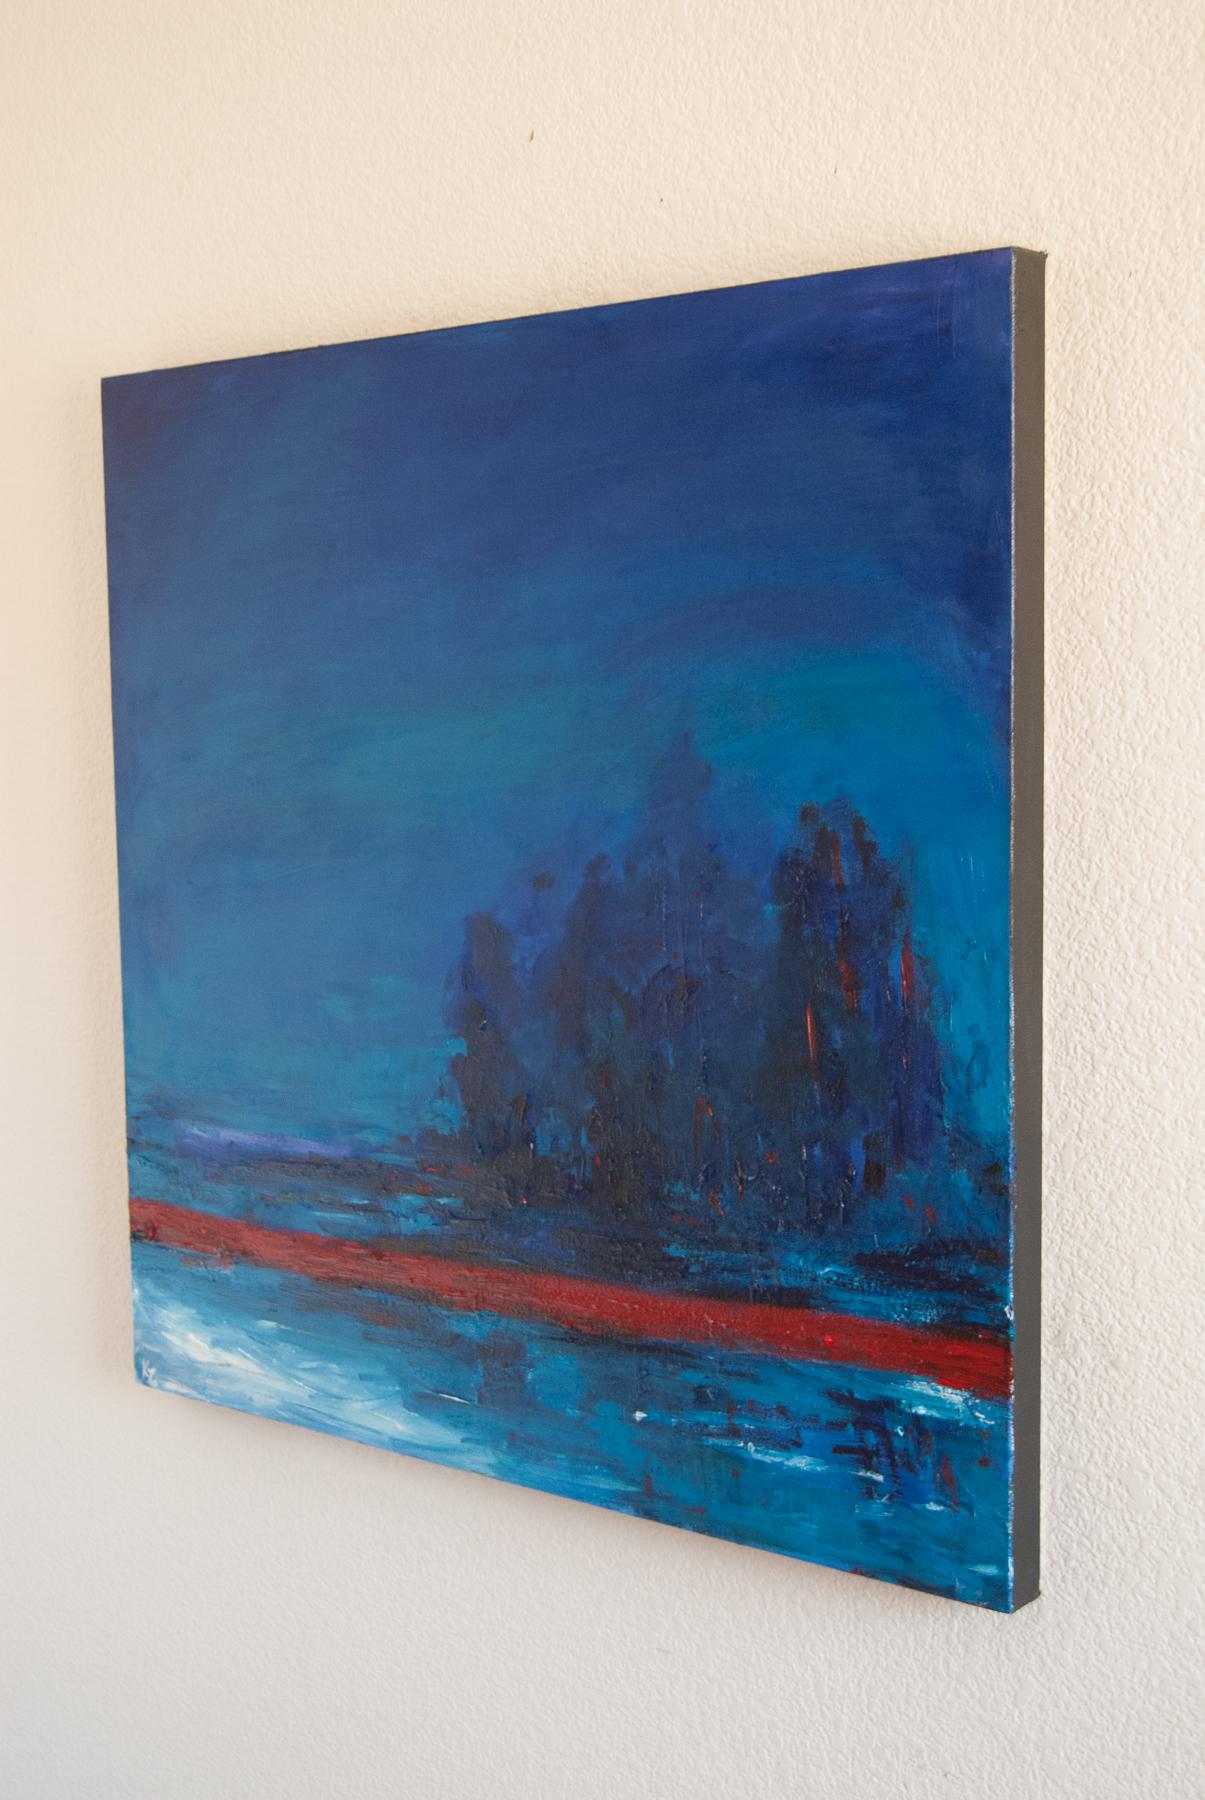 <p>Artist Comments<br>The scene captures a calm sea, echoing the quiet of the night. In the distance, an islet with towering trees seamlessly blends with the colors of the sky and water. A red streak pierces the predominantly blue scene, adding a